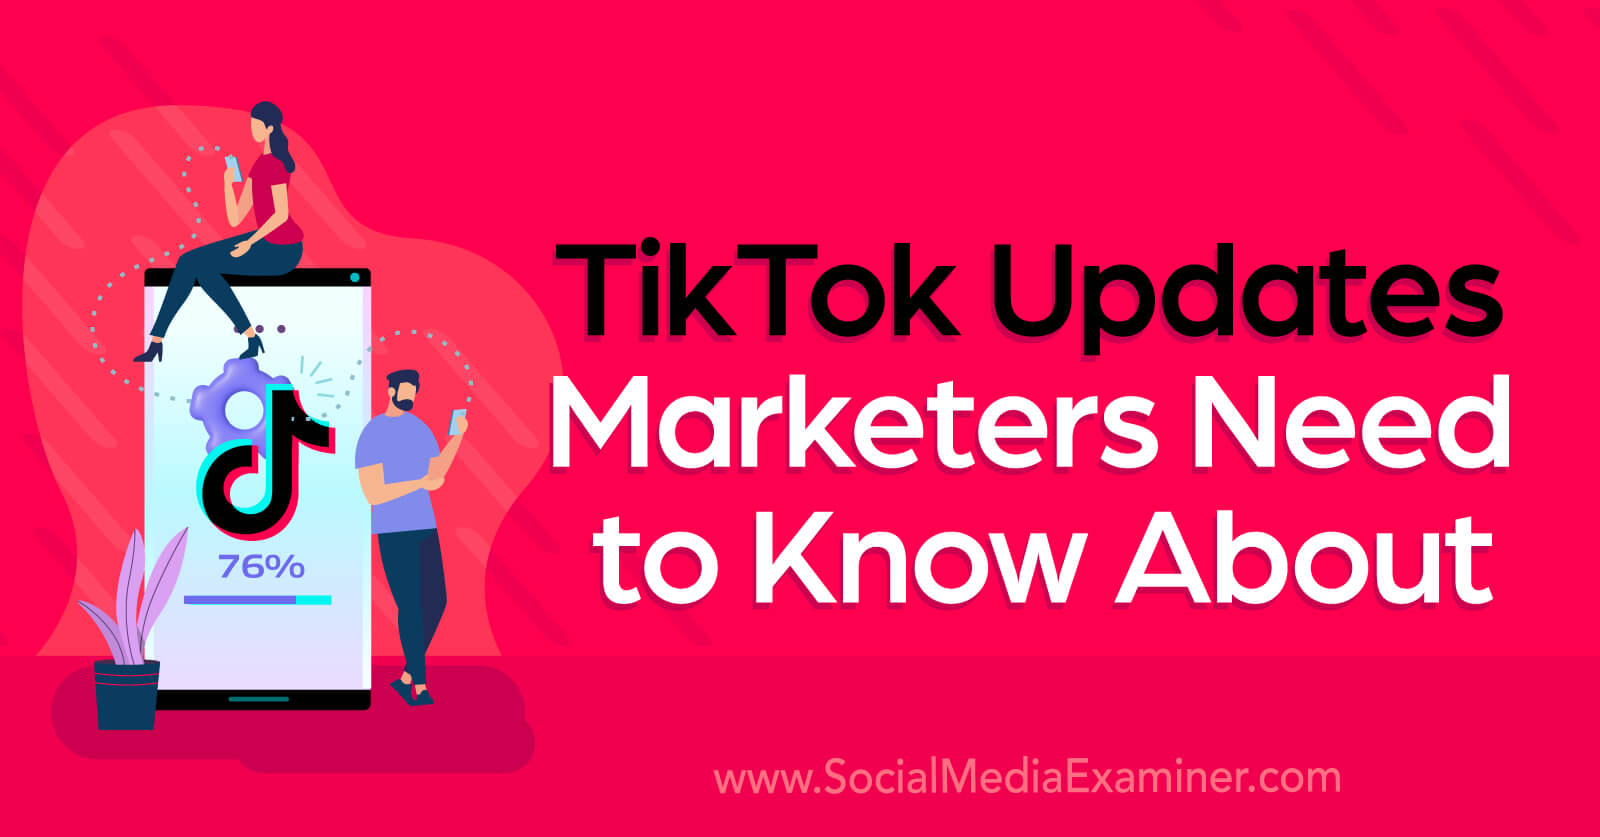 TikTok Updates Marketers Need to Know About by Social Media Examiner